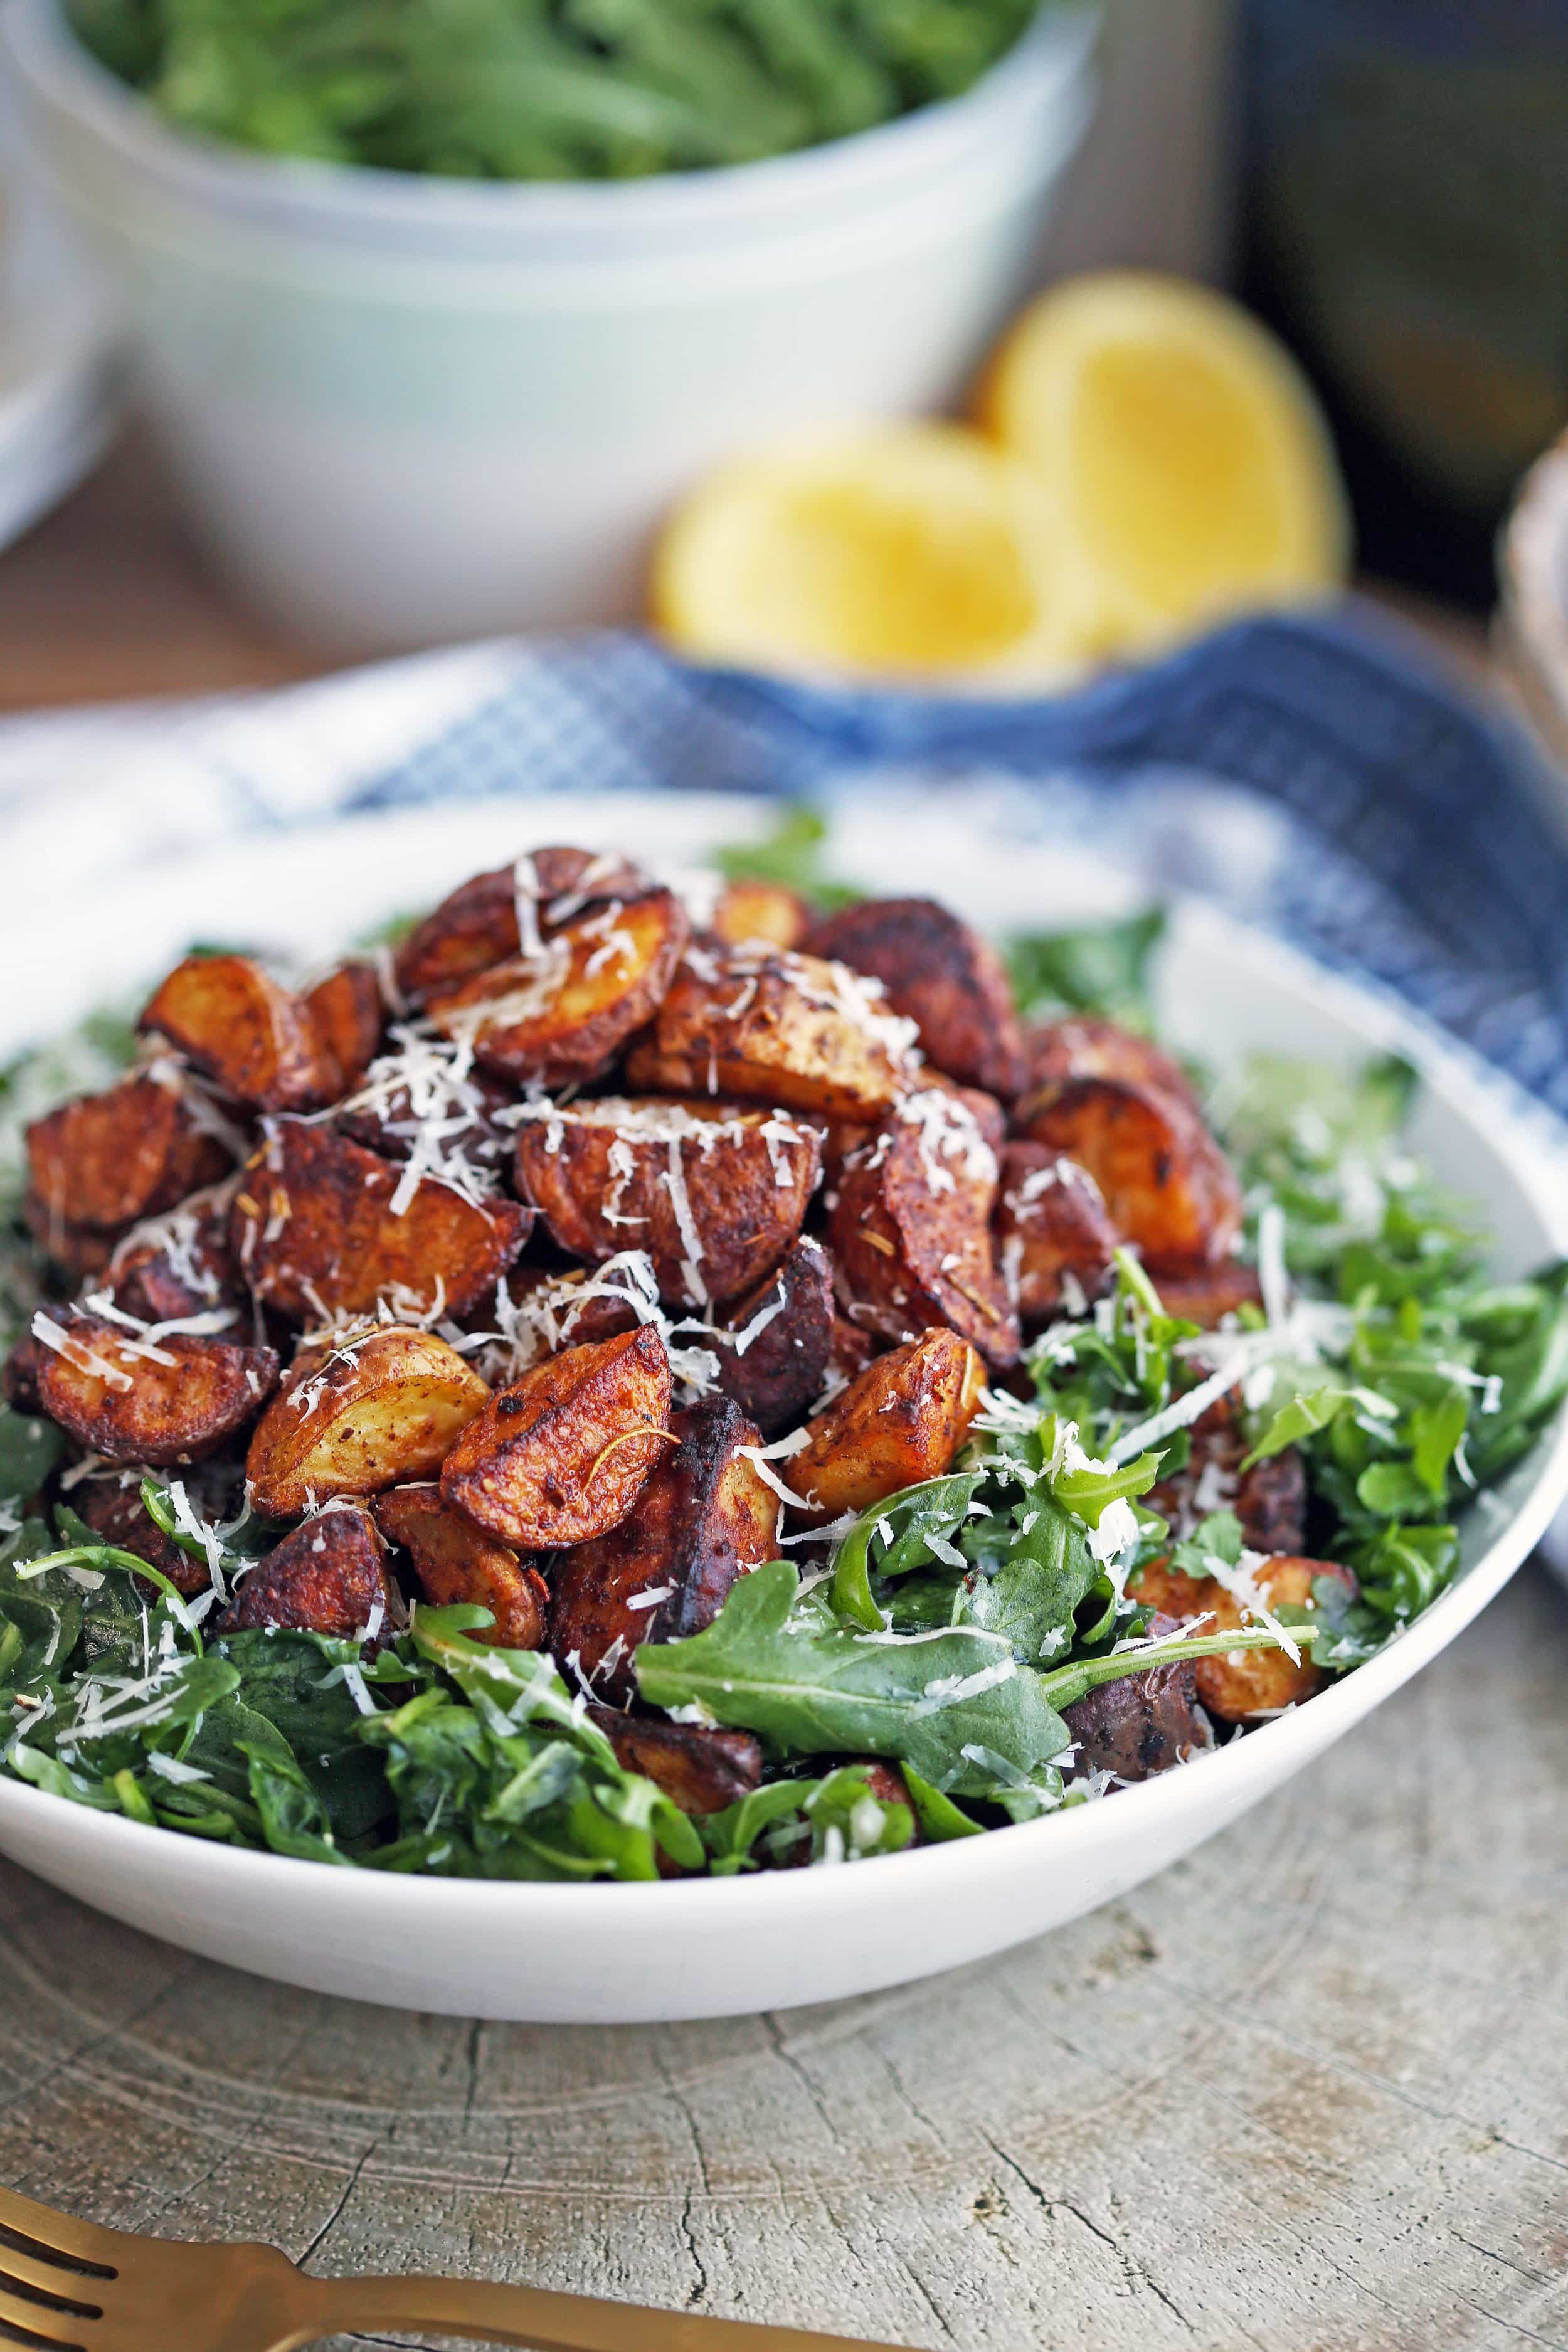 Crispy roasted potatoes with baby arugula salad in a white bowl.